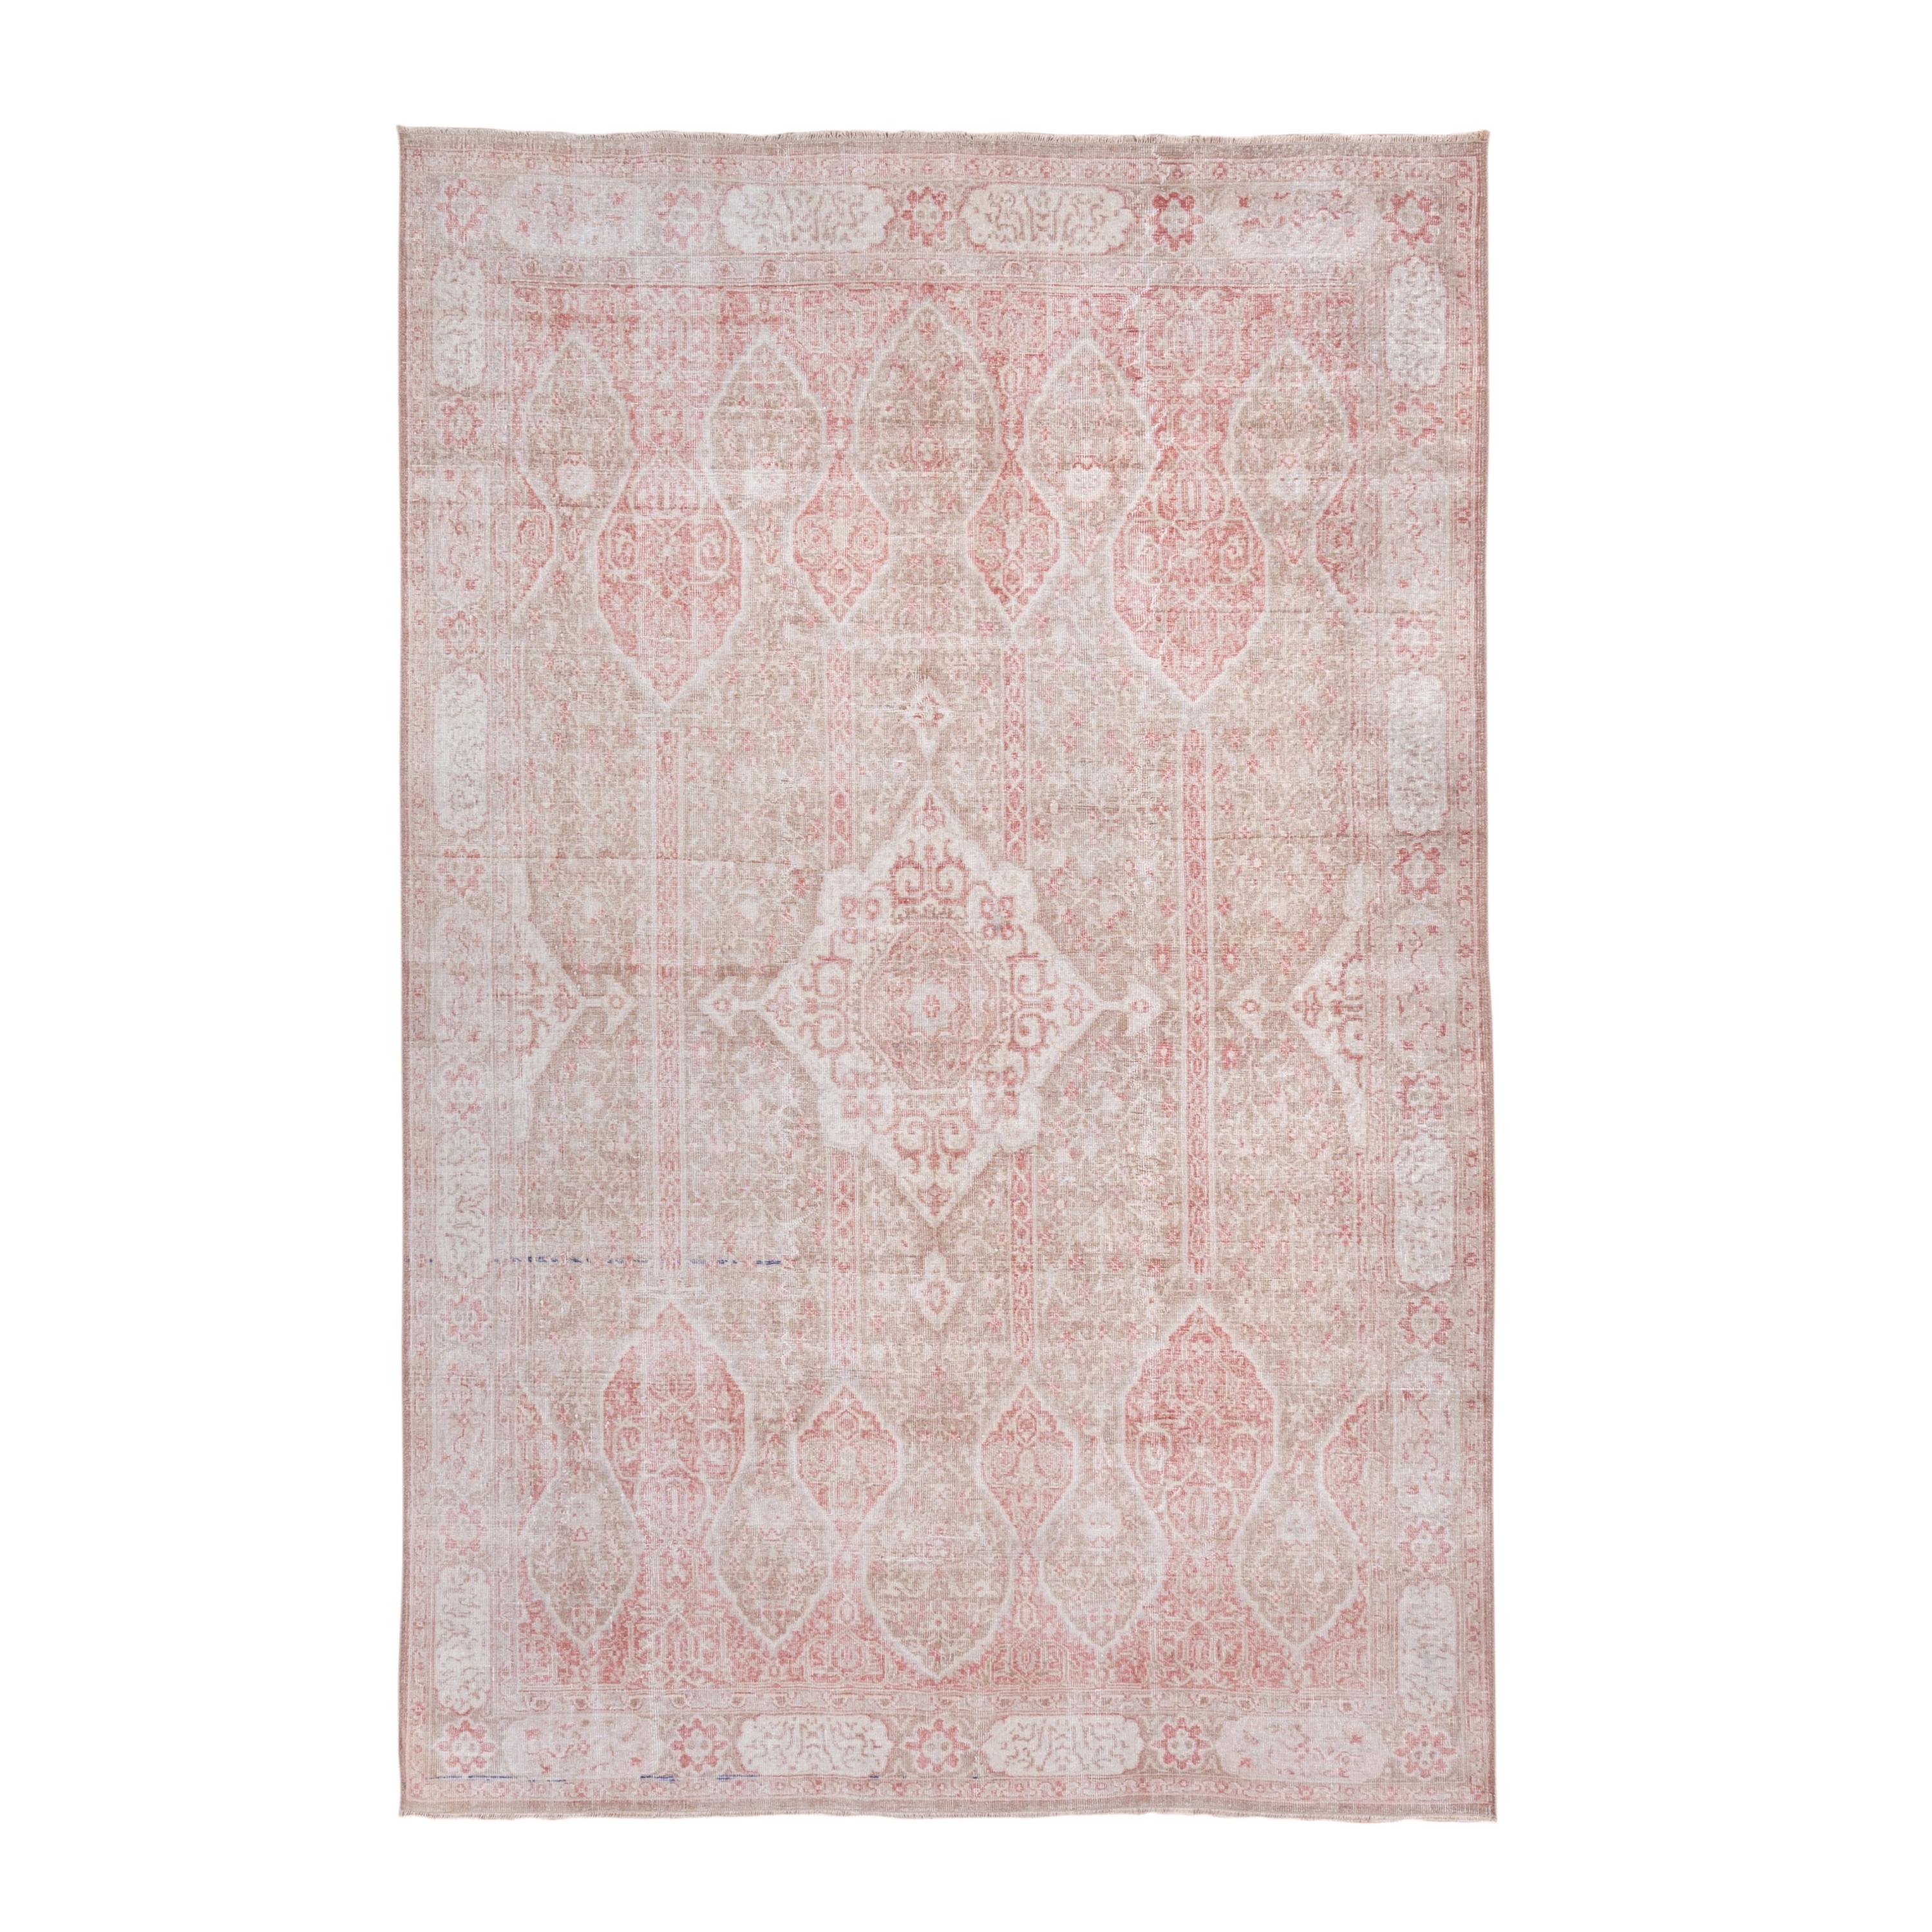 Unique Oushak Rug, Pink, Light Brown and Ivory